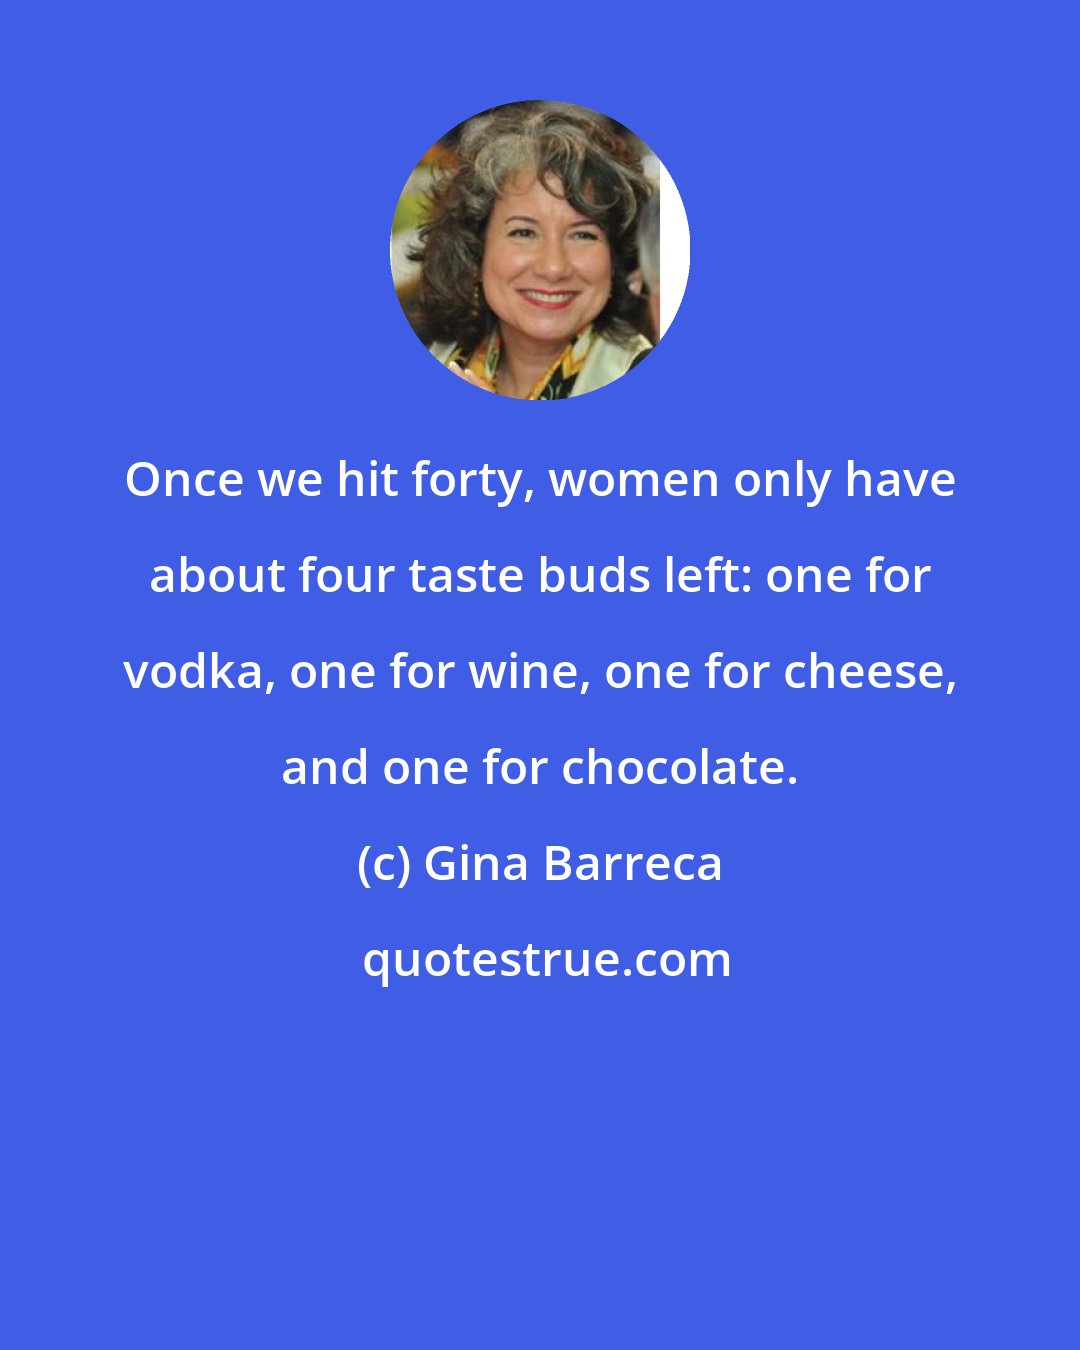 Gina Barreca: Once we hit forty, women only have about four taste buds left: one for vodka, one for wine, one for cheese, and one for chocolate.